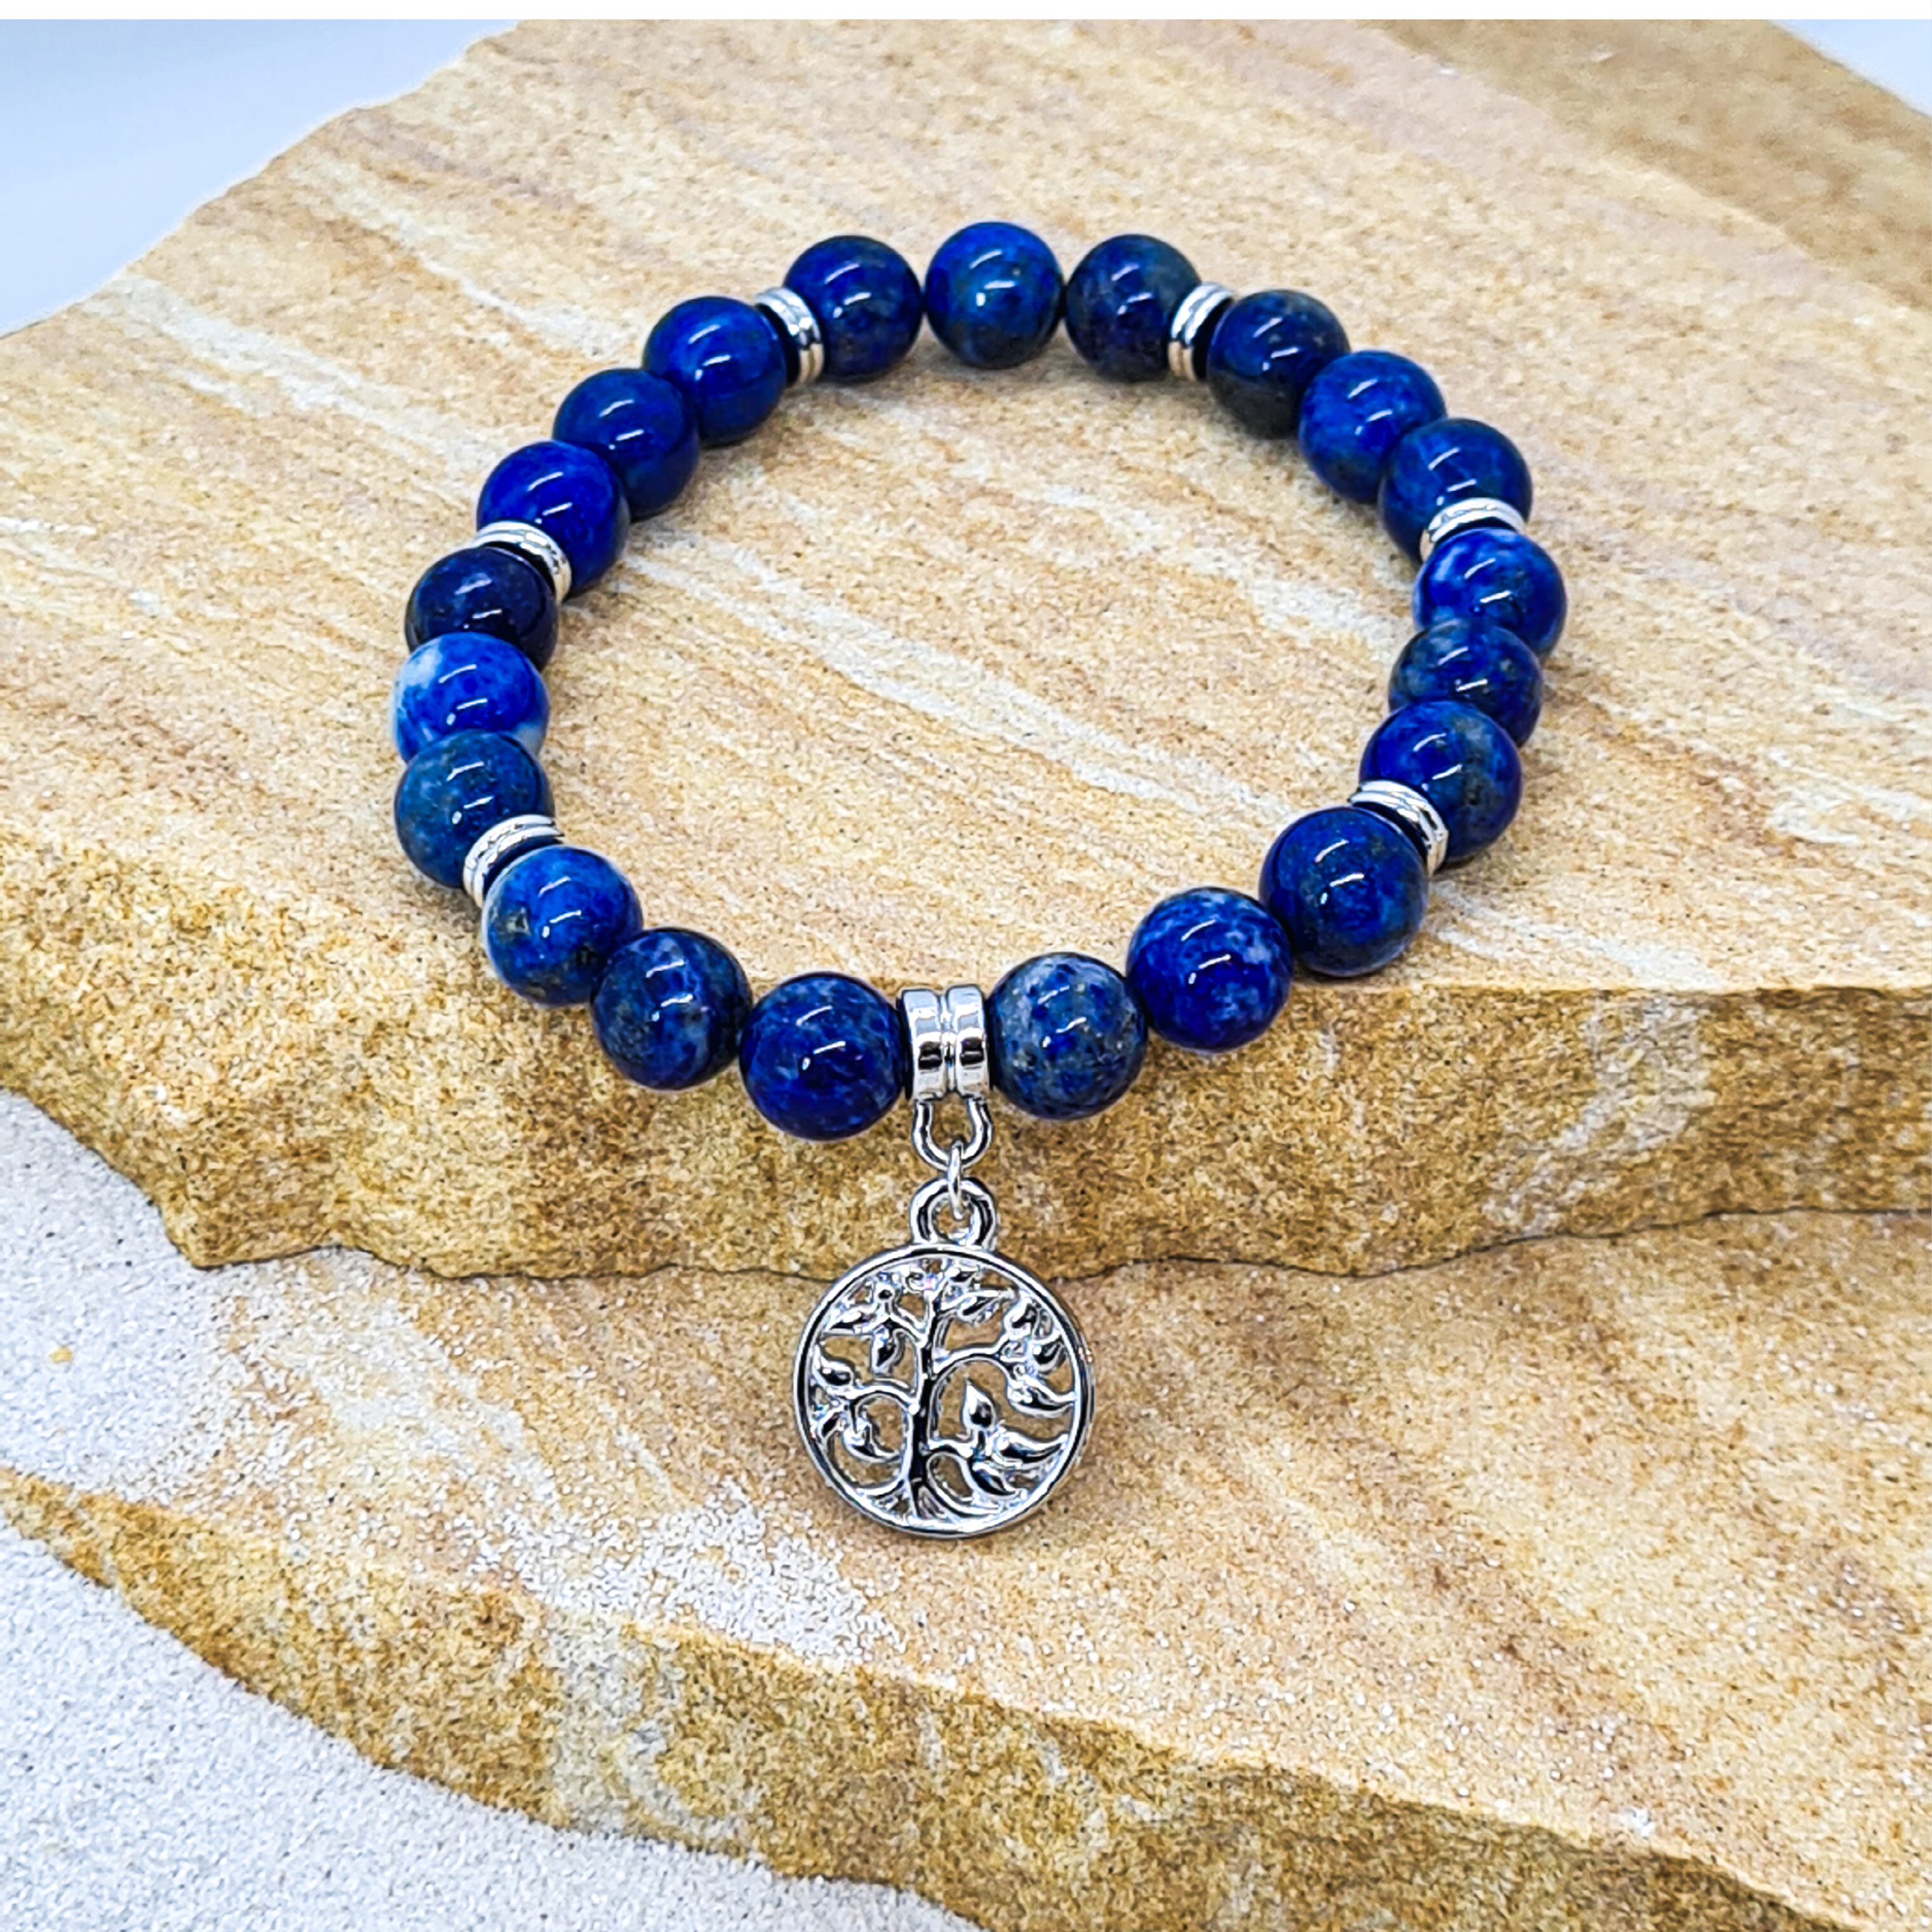 Lapis Lazuli 8mm crystal bead bracelet with silver tree of life charm